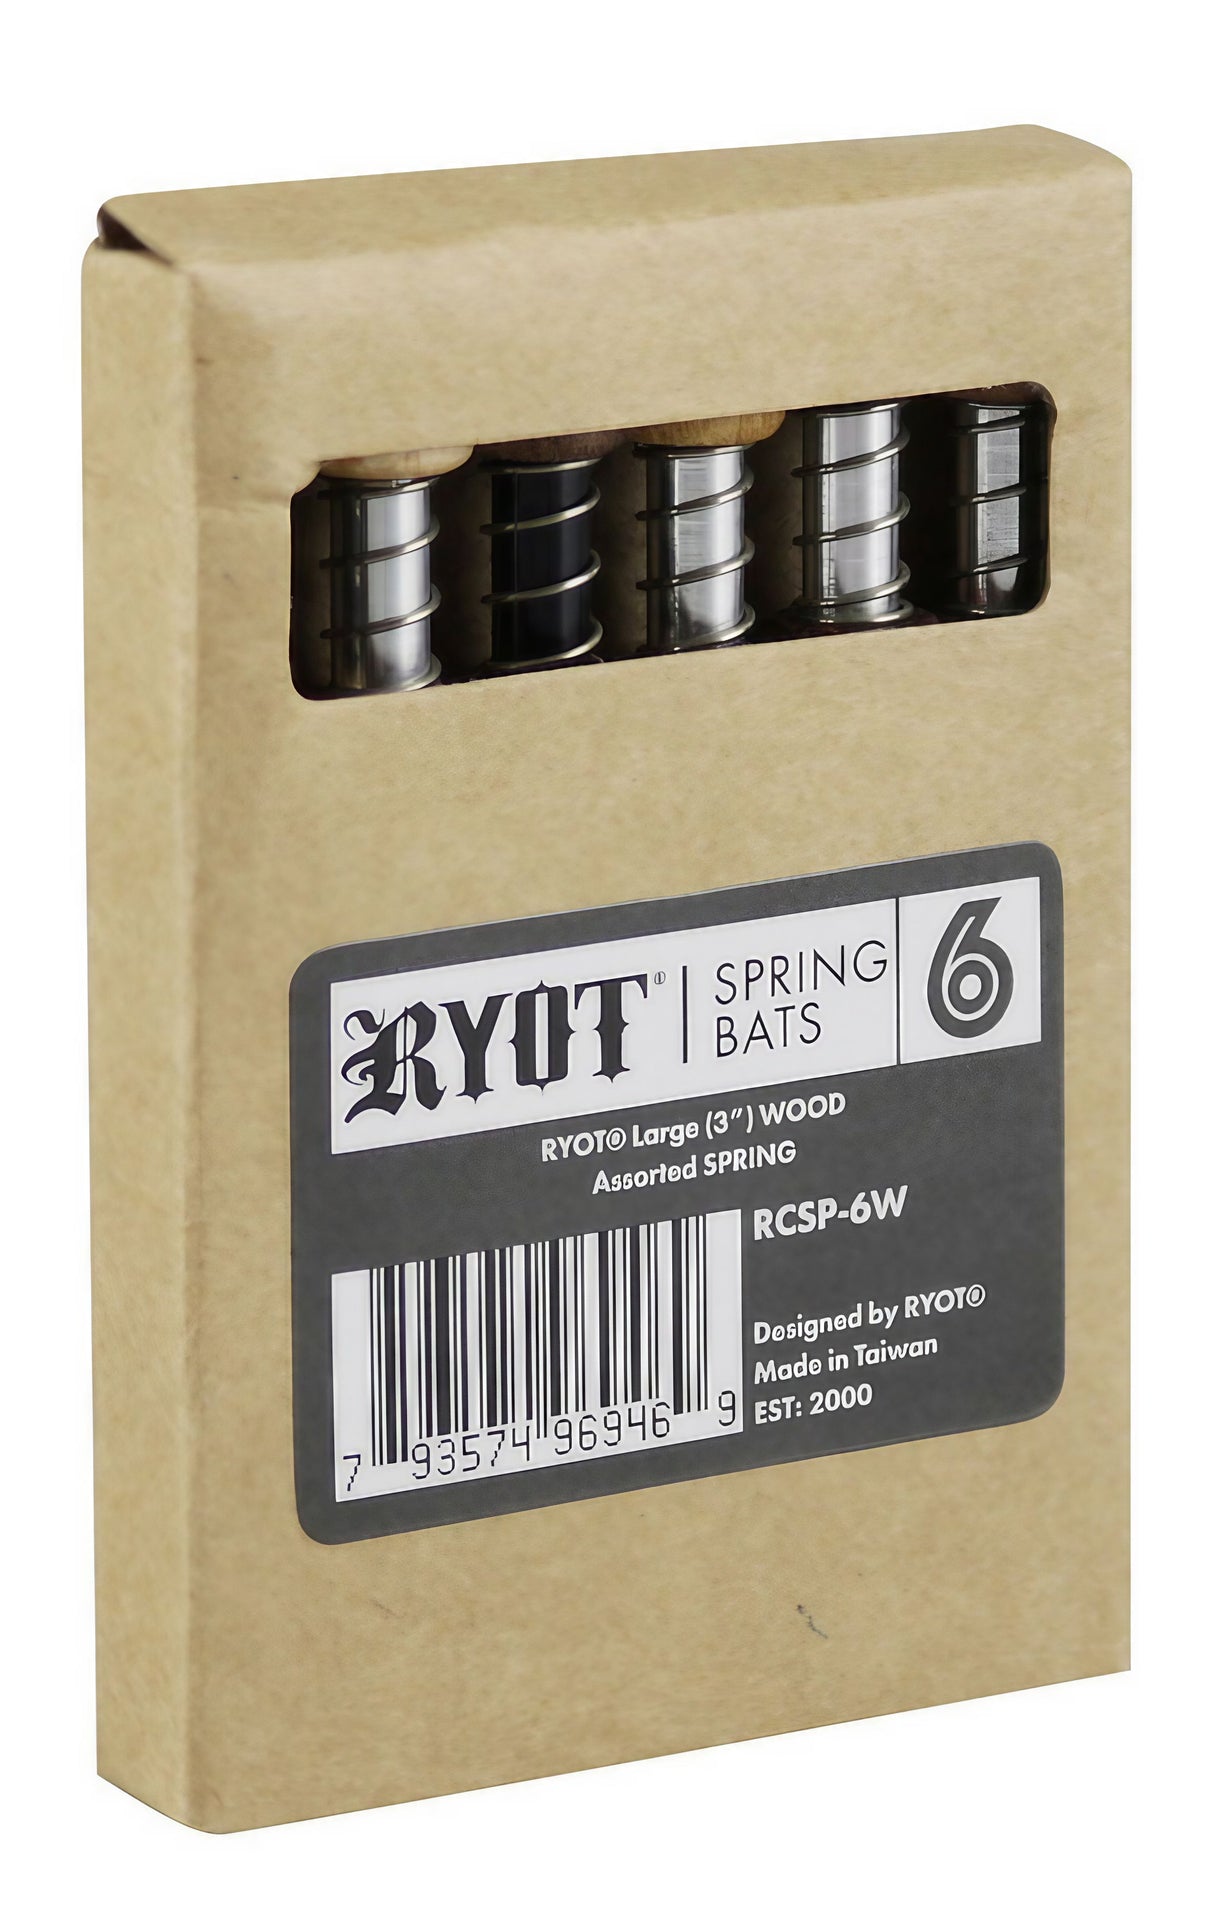 RYOT Taster with Spring 6-Pack, 3" Steel & Wood Hand Pipes, Portable Design